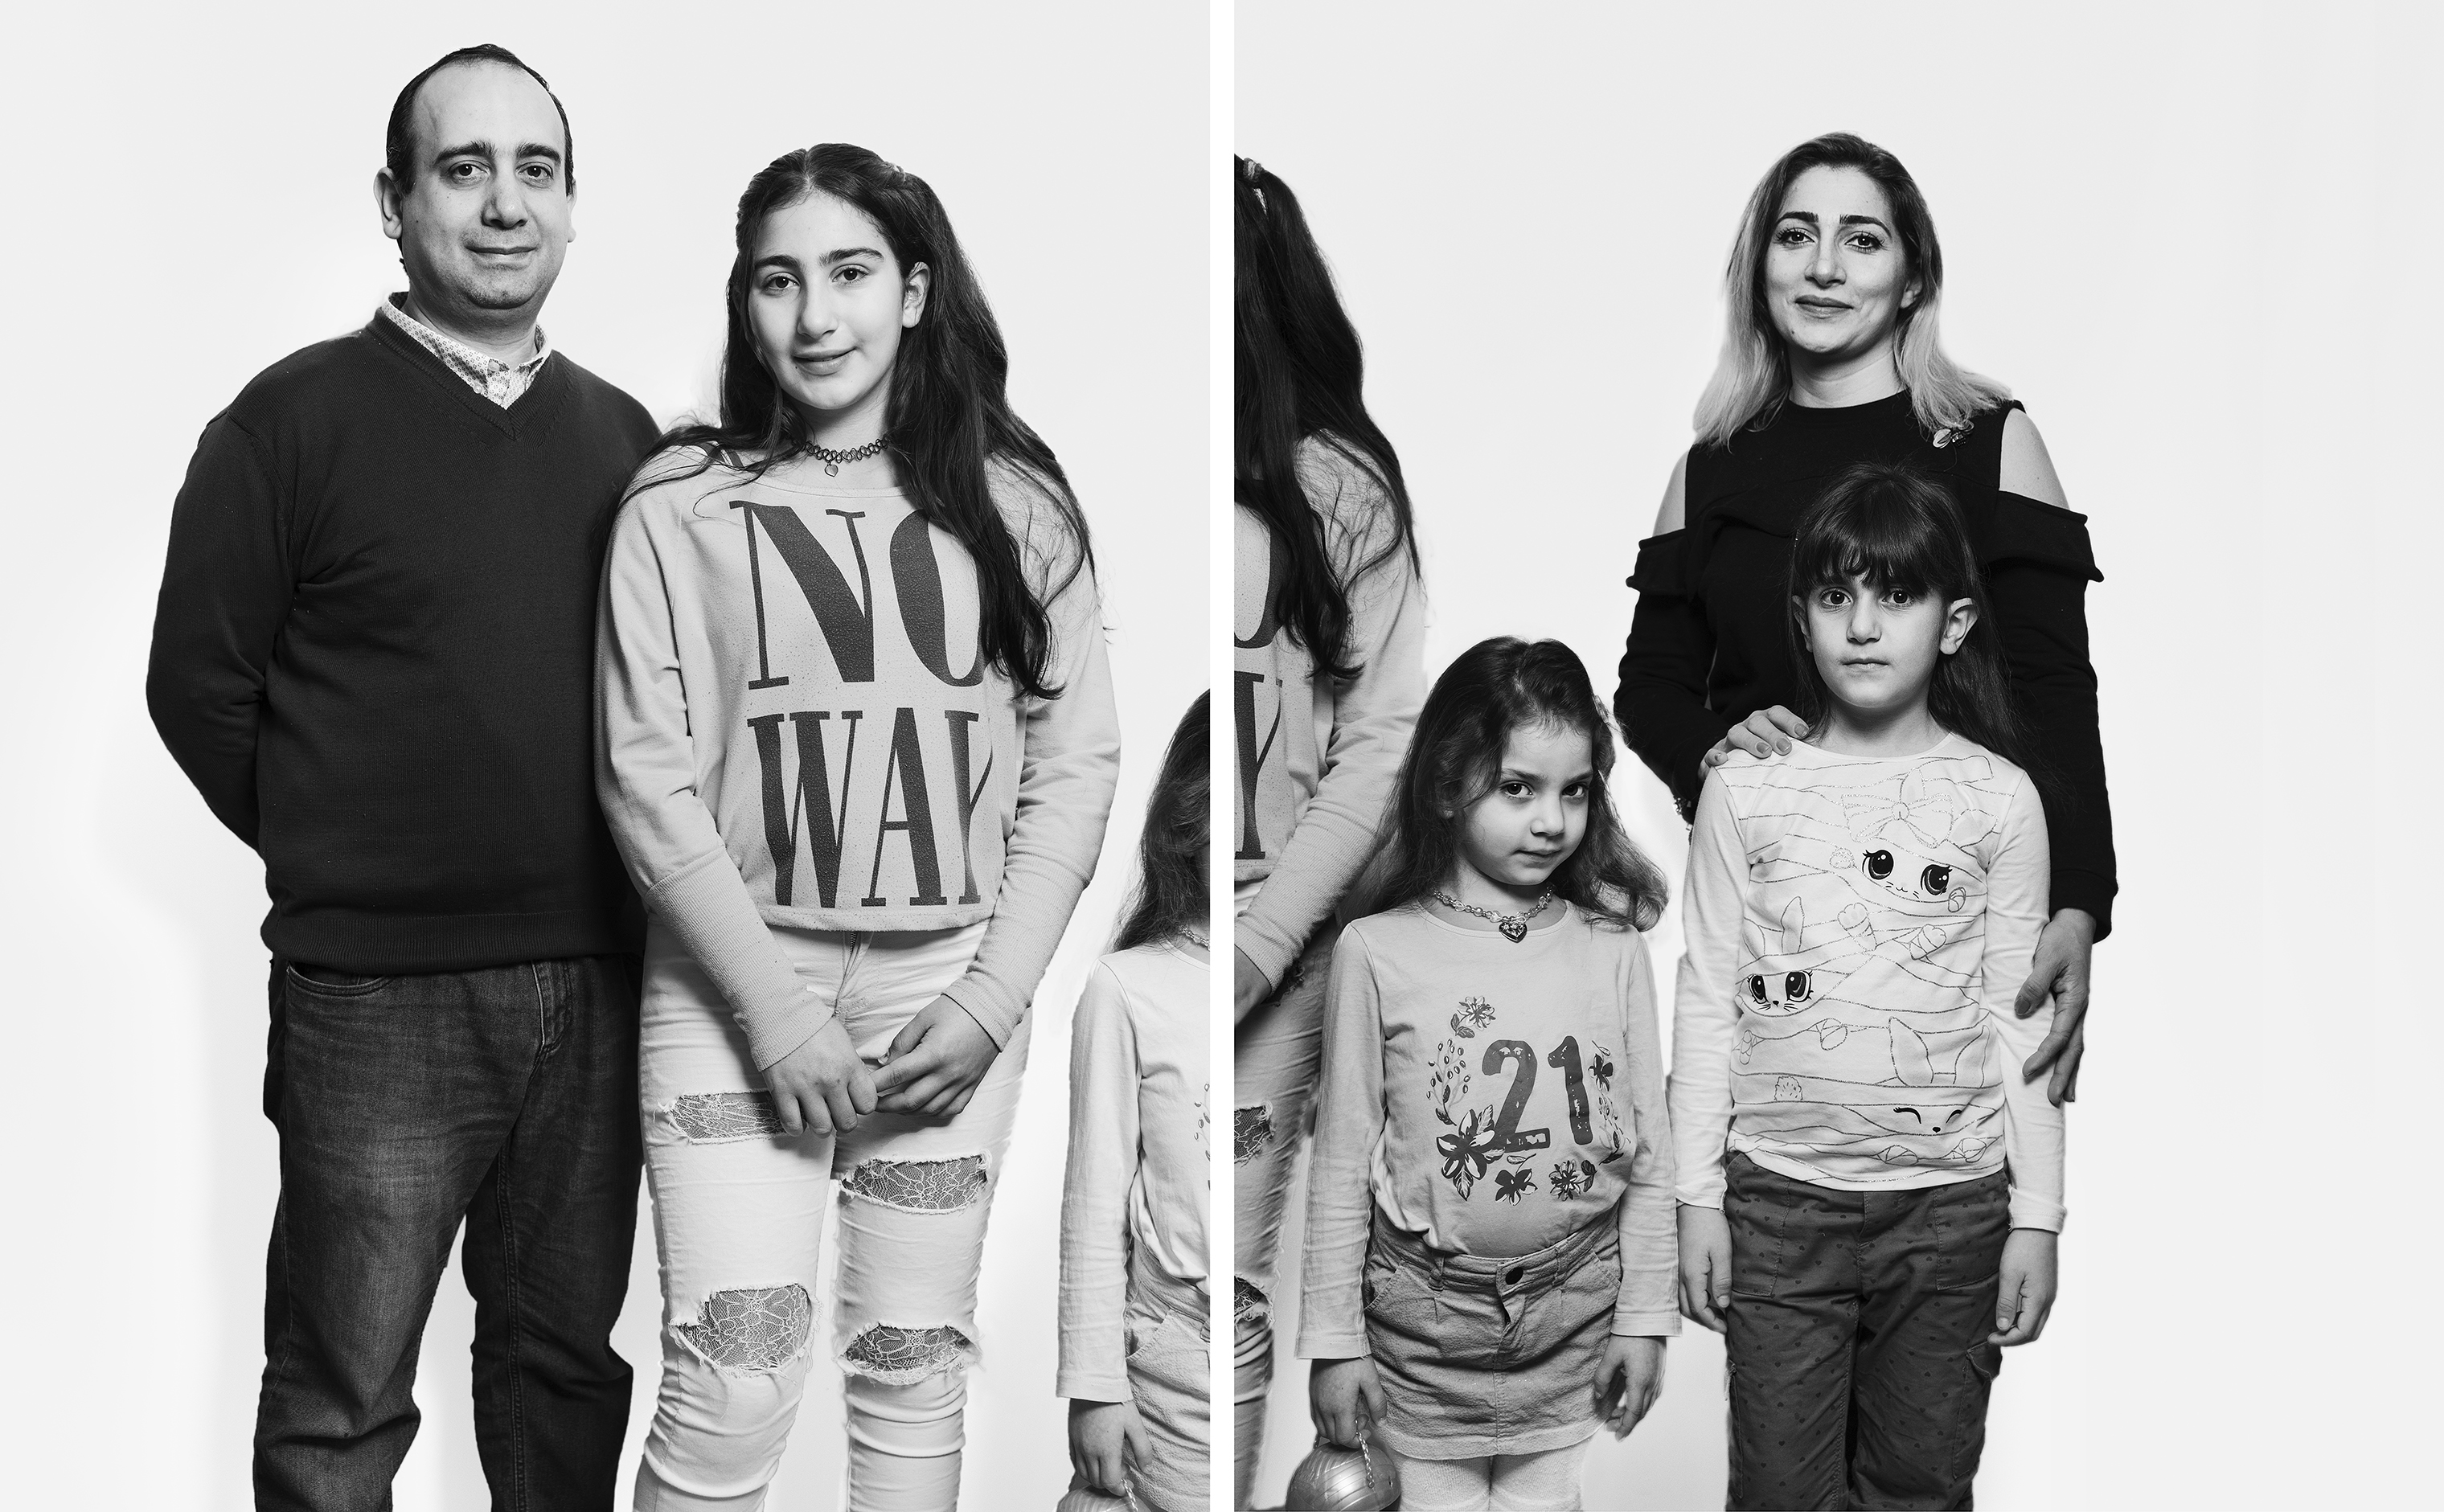 Sami Baladi, 43, and his wife Mirey Darwich, 37 (far right), fled the civil war in Syria with their children Fabienne, 12, and Joyce, 7. Darwich was pregnant with Clara, 4, when they left their home. The family now runs a Syrian restaurant in Lippstadt, Germany (Davide Monteleone for TIME)